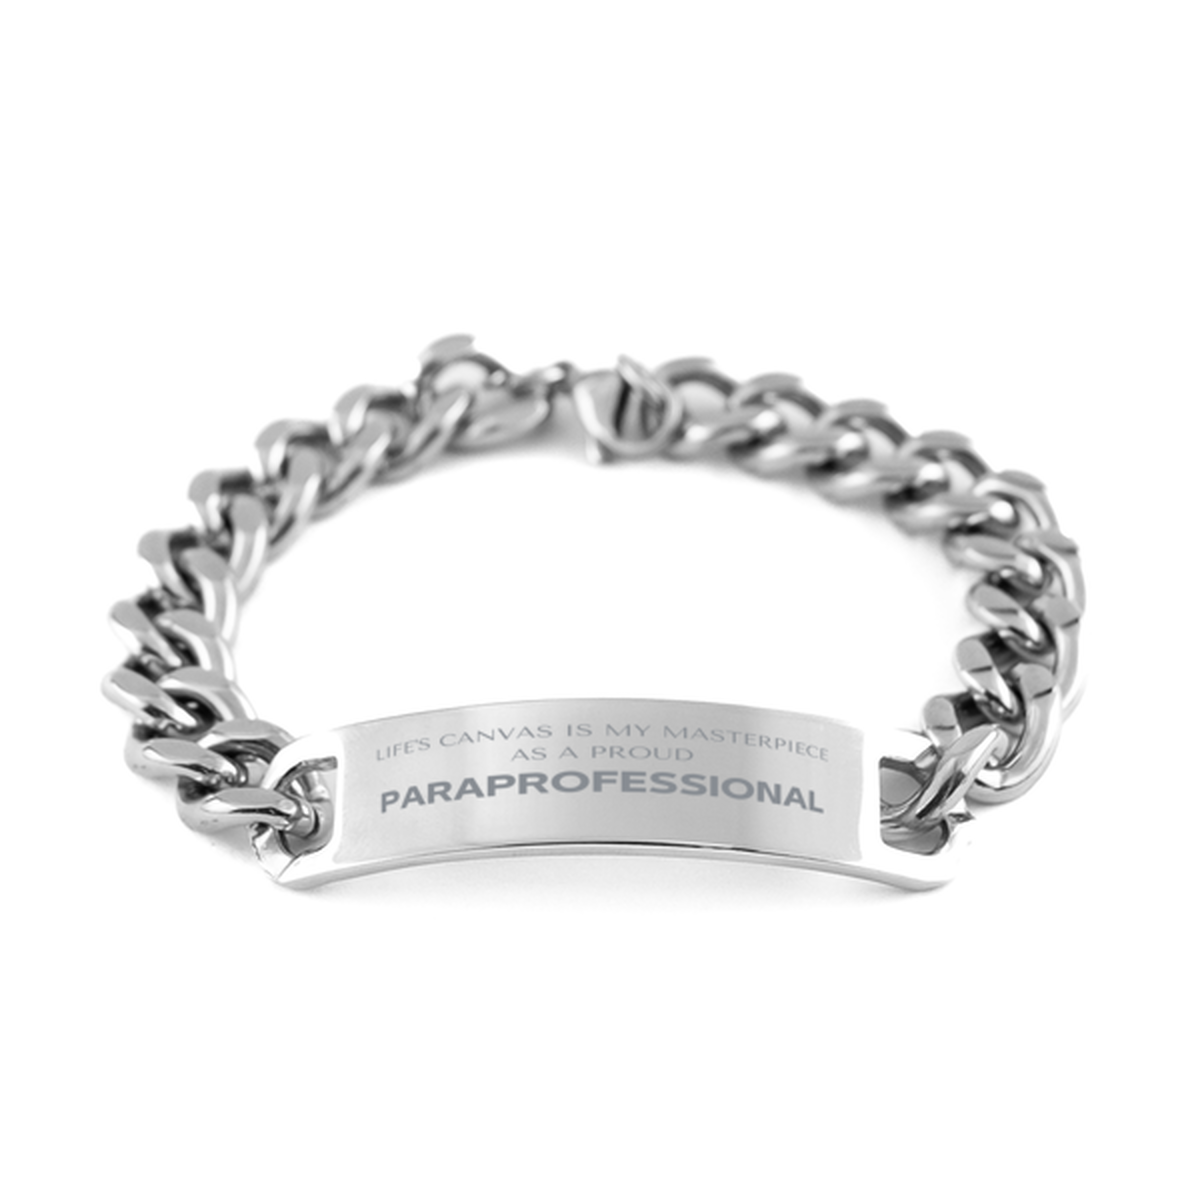 Proud Paraprofessional Gifts, Life's canvas is my masterpiece, Epic Birthday Christmas Unique Cuban Chain Stainless Steel Bracelet For Paraprofessional, Coworkers, Men, Women, Friends